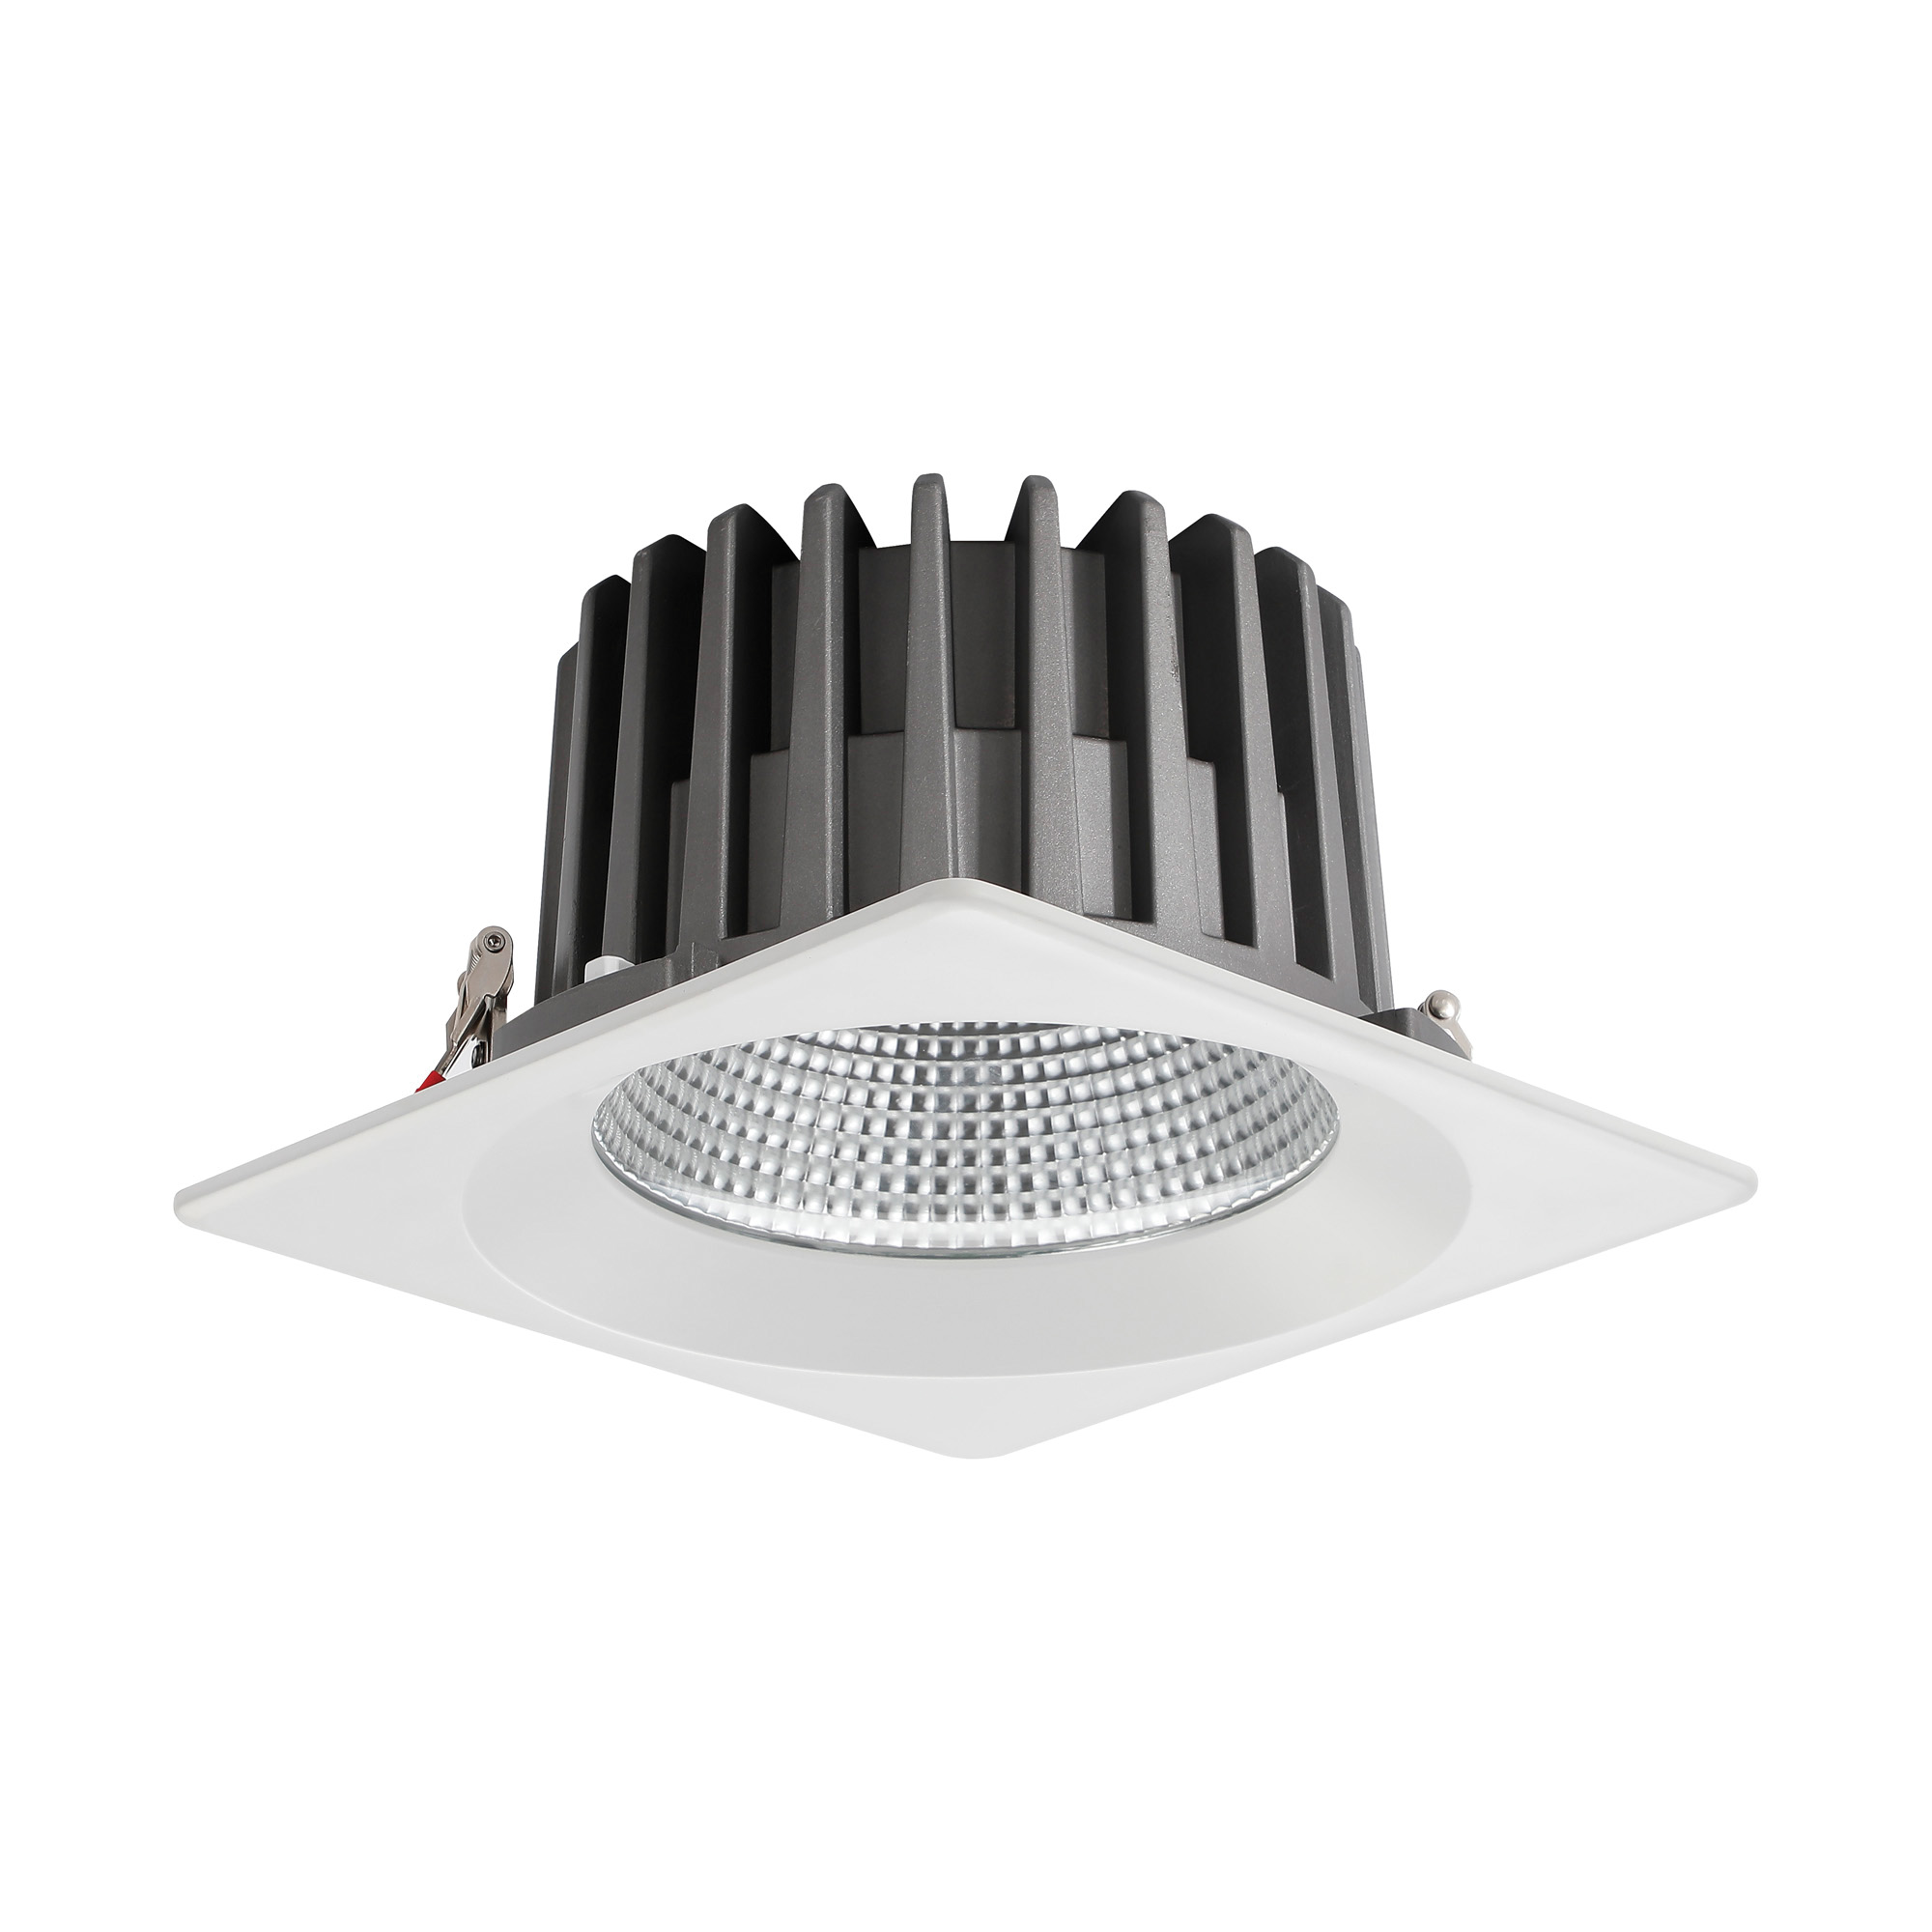 DL200084  Bionic 50, 50W, 1200mA, White Deep Square Recessed Downlight, 4500lm ,Cut Out 175mm, 50° , 5000K, IP44, DRIVER INC., 5yrs Warranty.